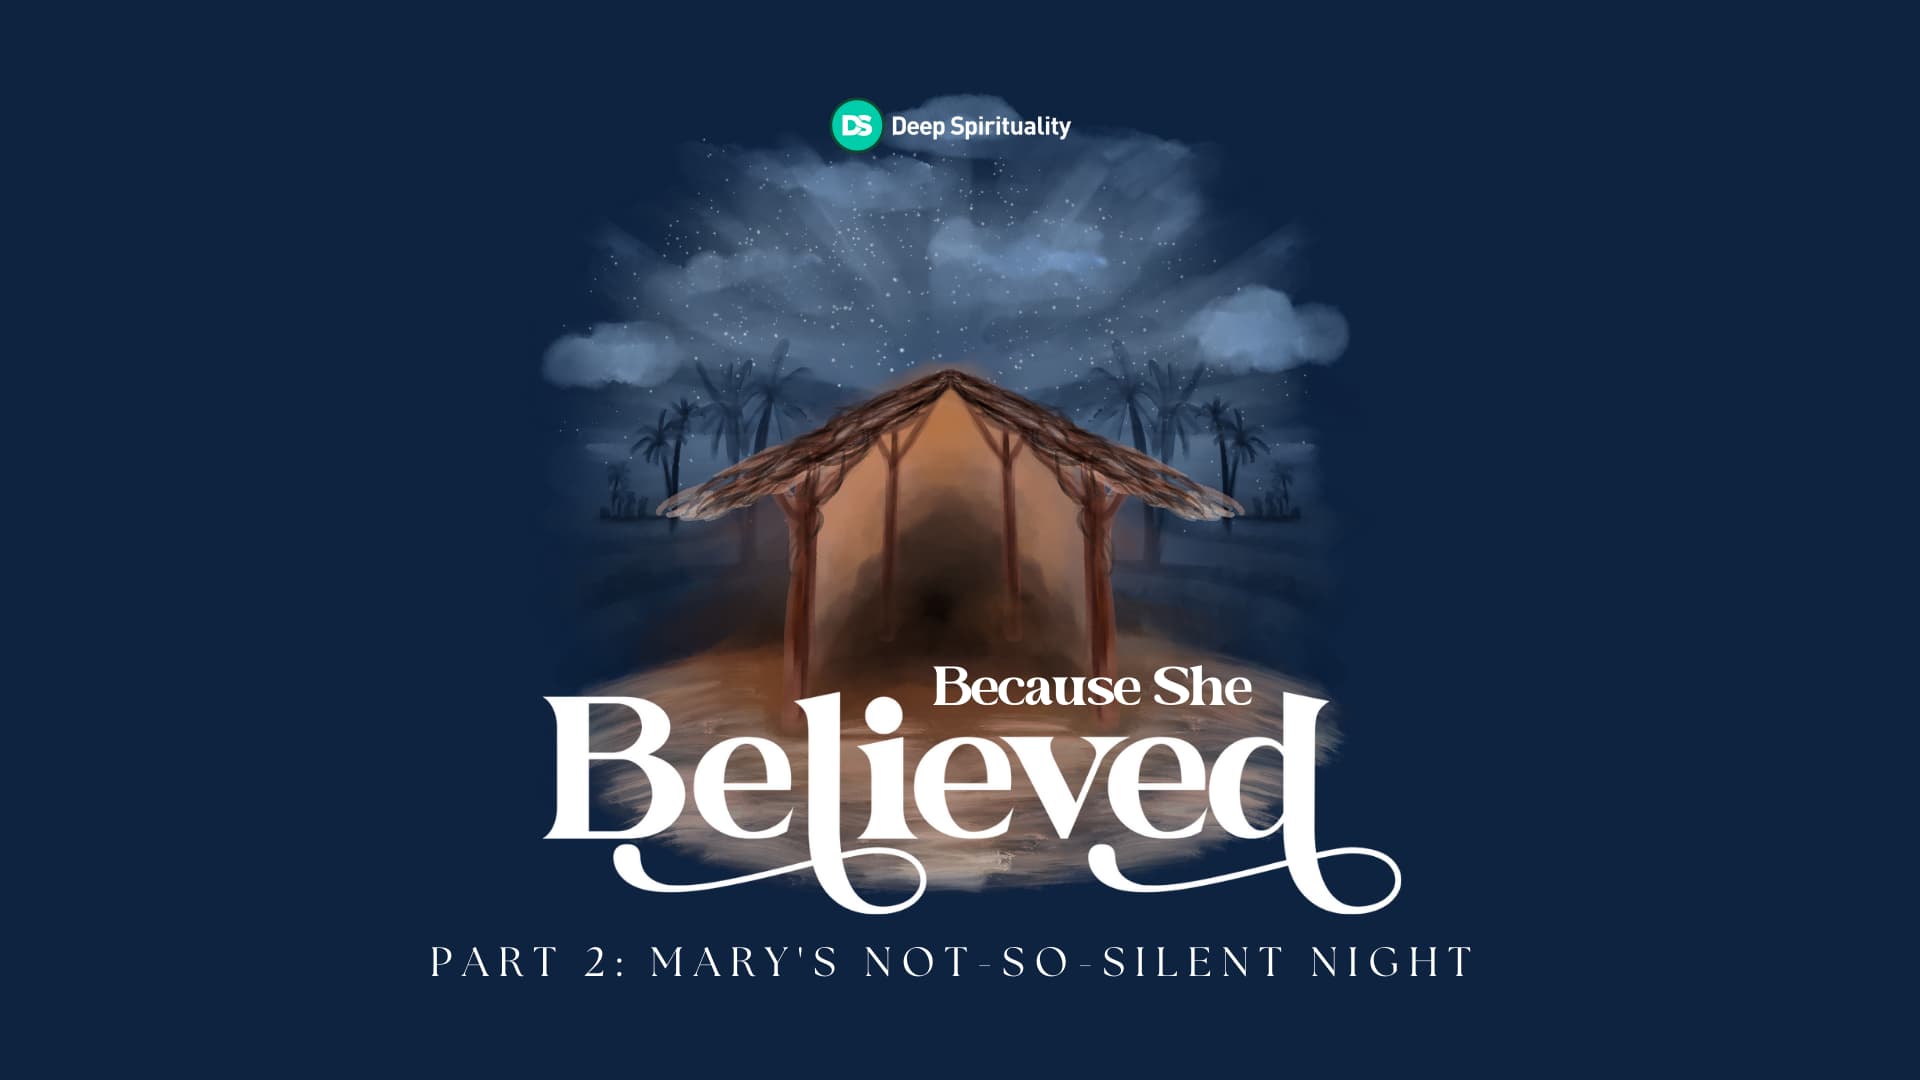 Mary's Not-So-Silent Night: Because She Believed, Part 2 4